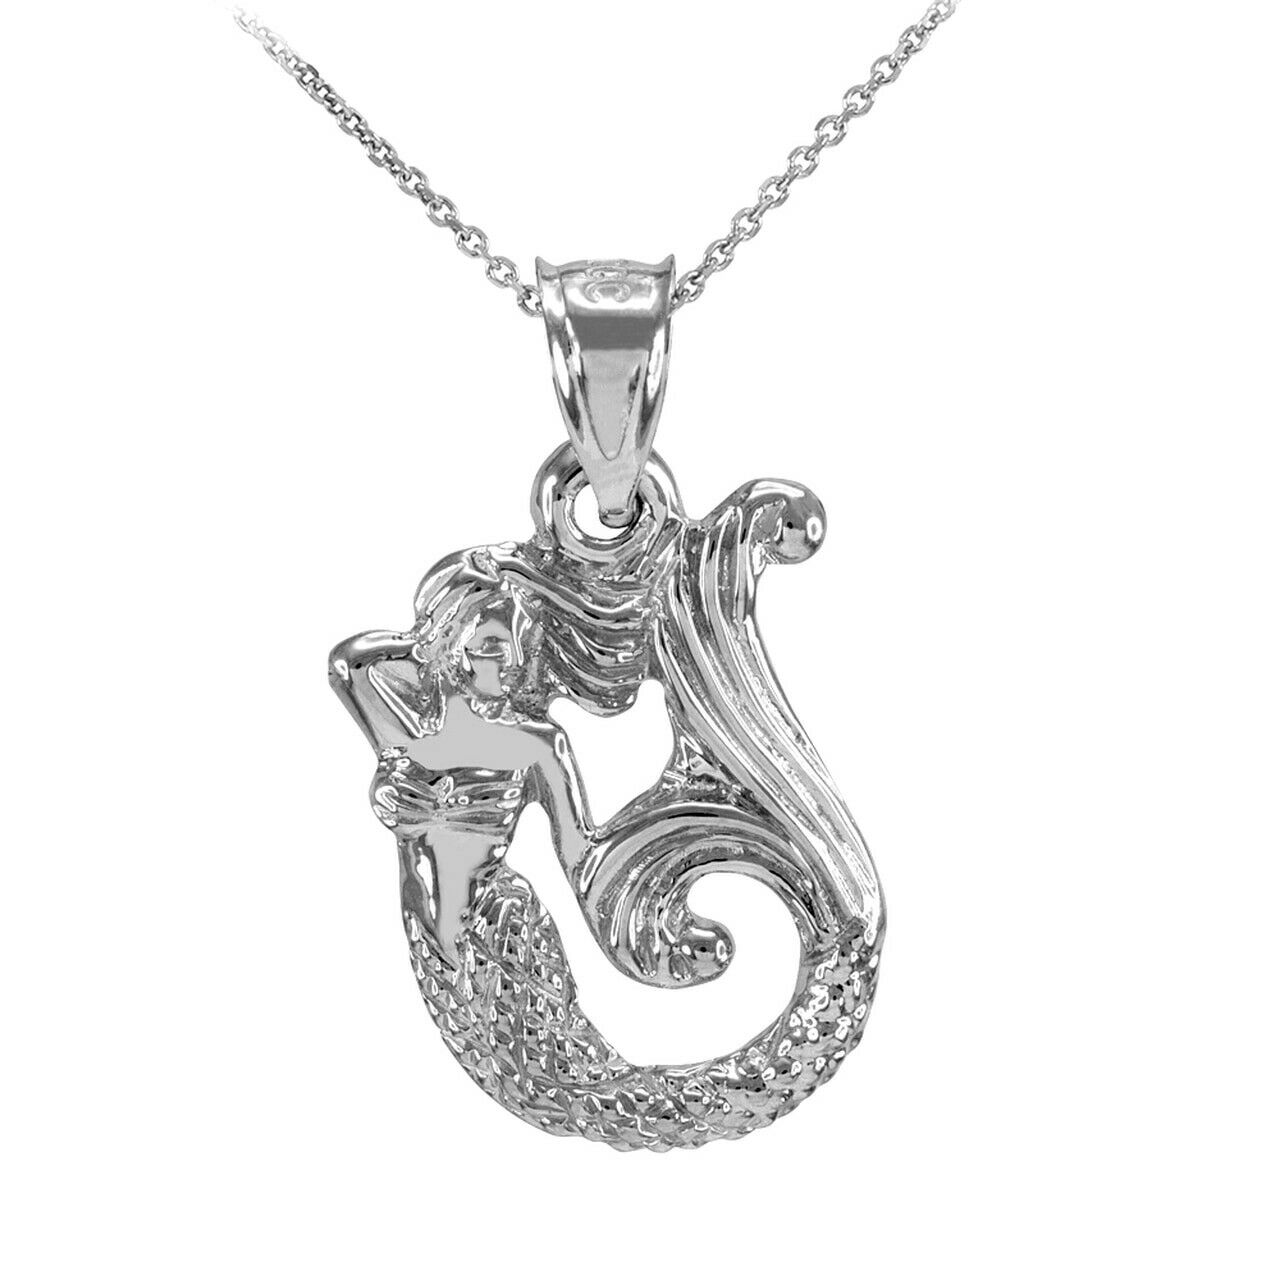 14K Solid White Gold Textured Fairytale Mermaid Pendant Necklace